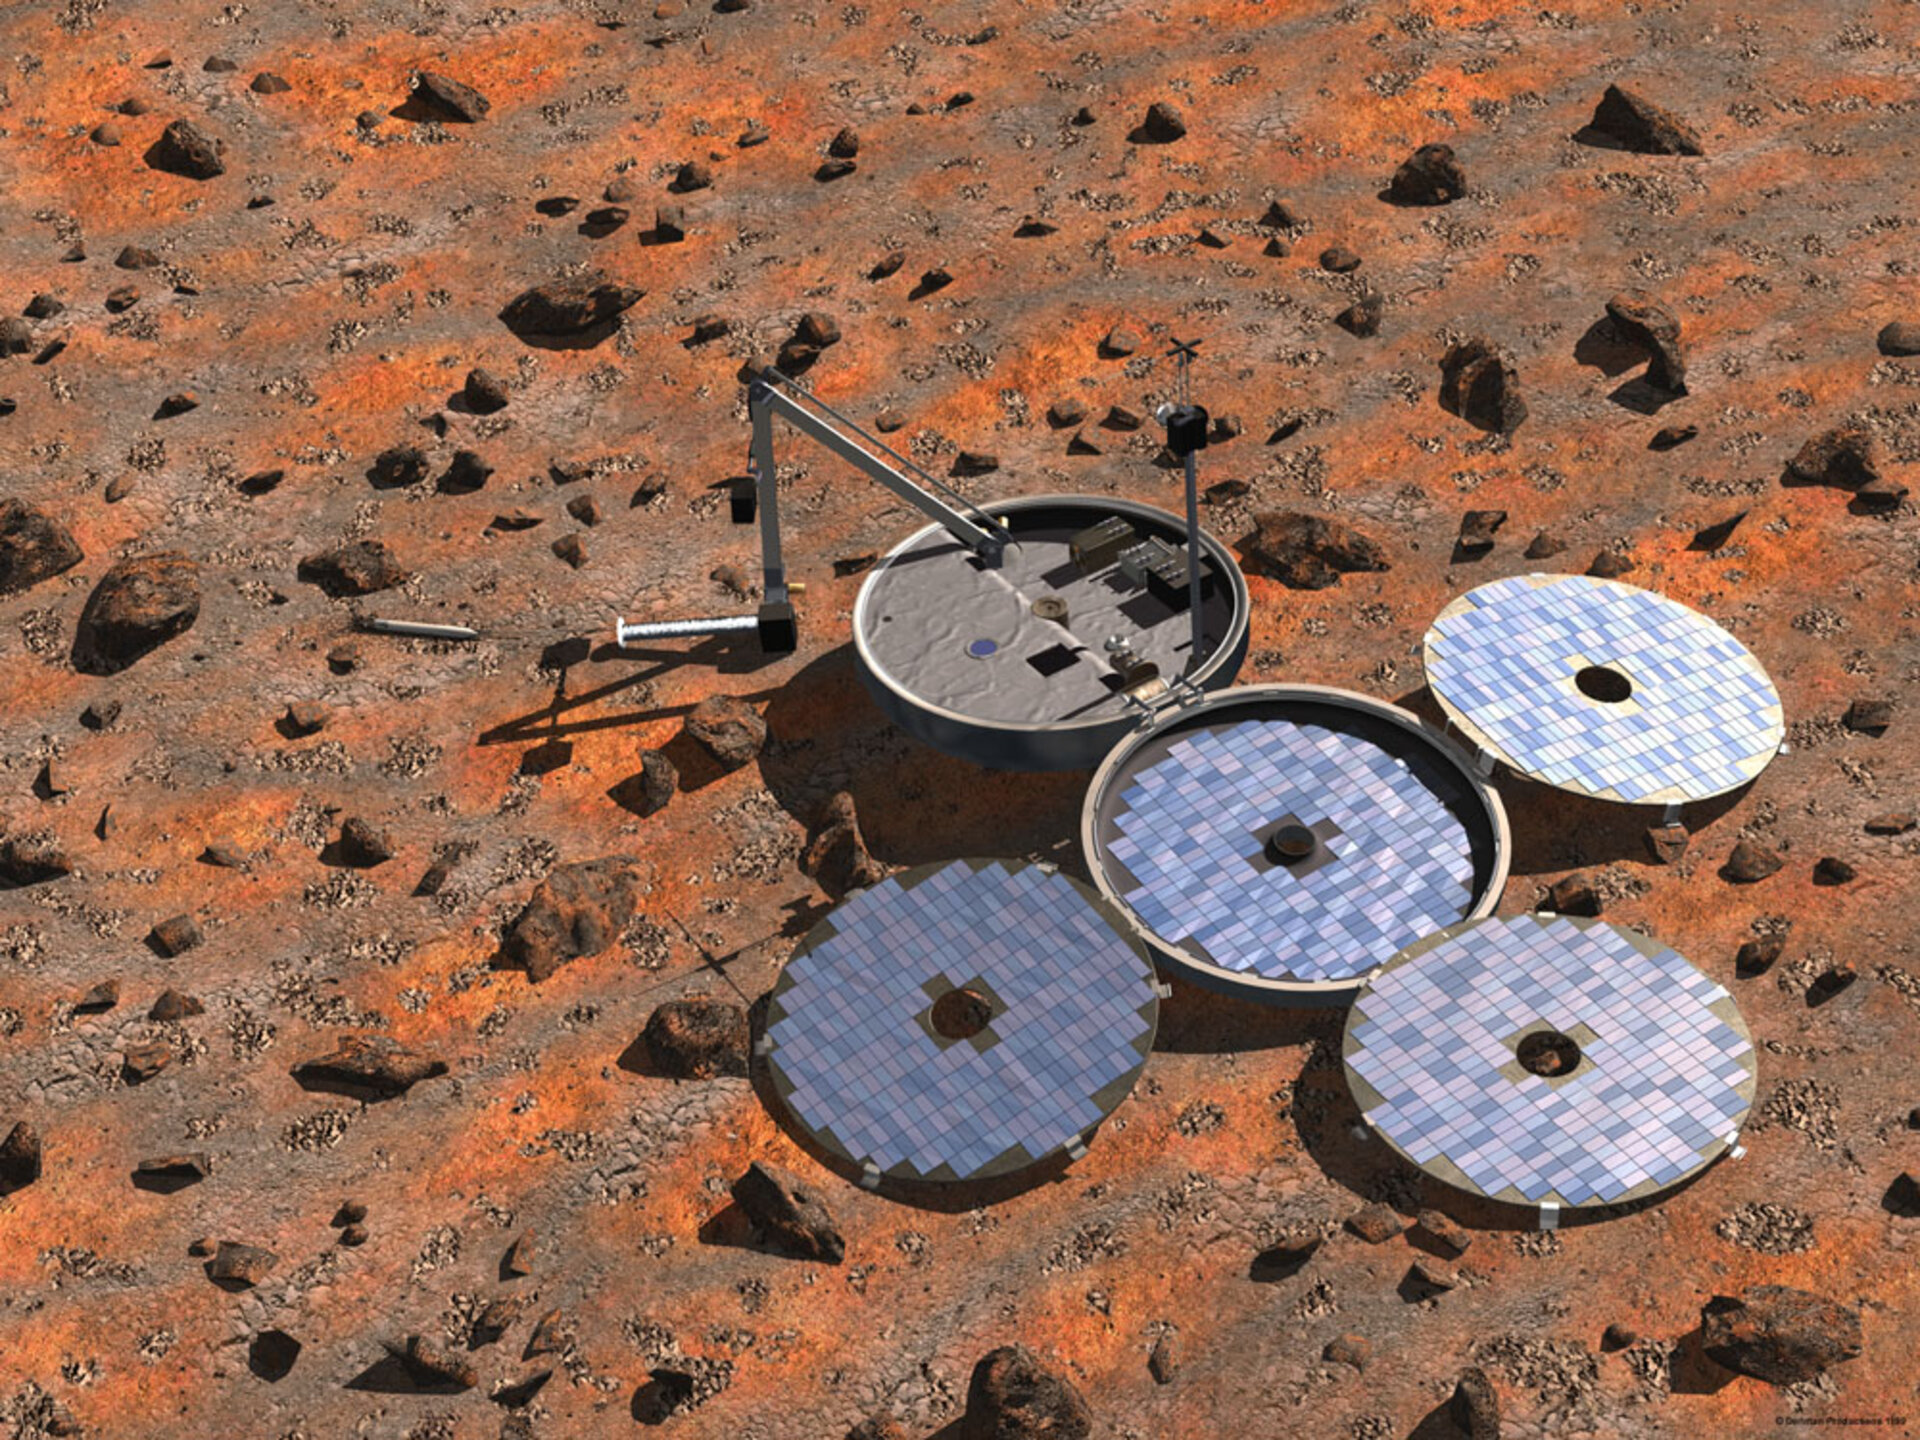 Beagle-2 is scheduled to land on Mars at Christmas